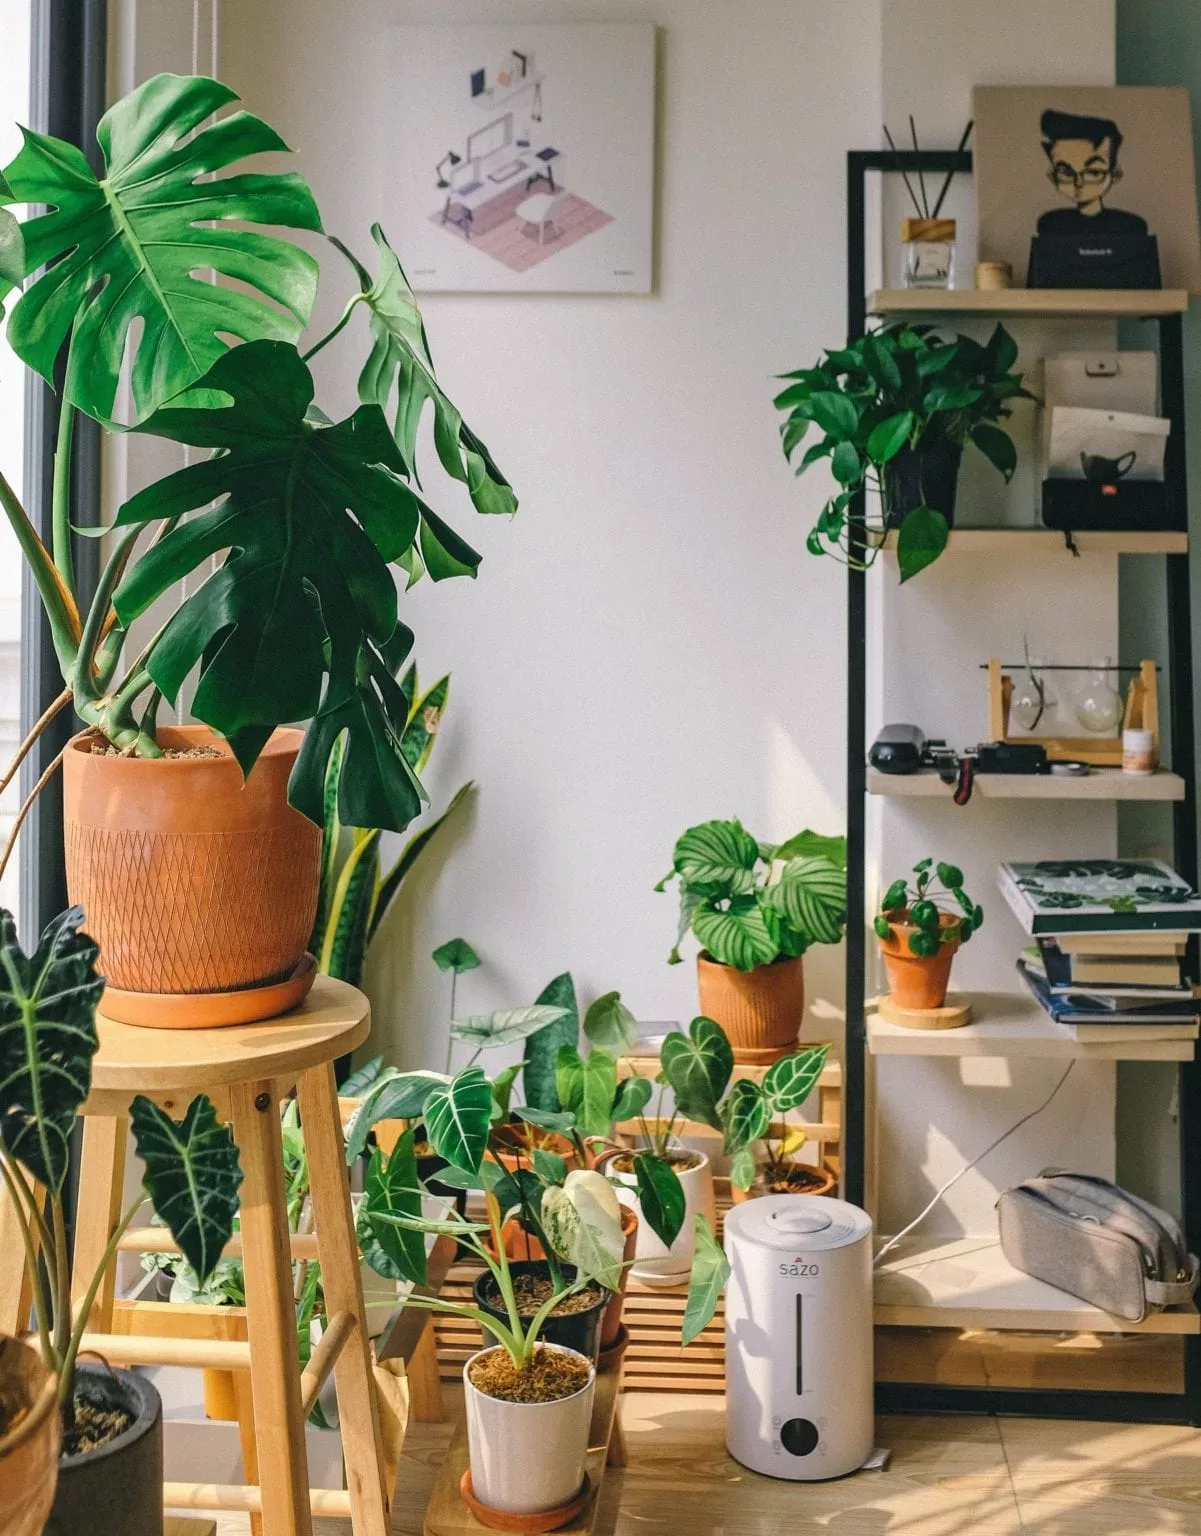 Shop for Houseplants at the Co-op